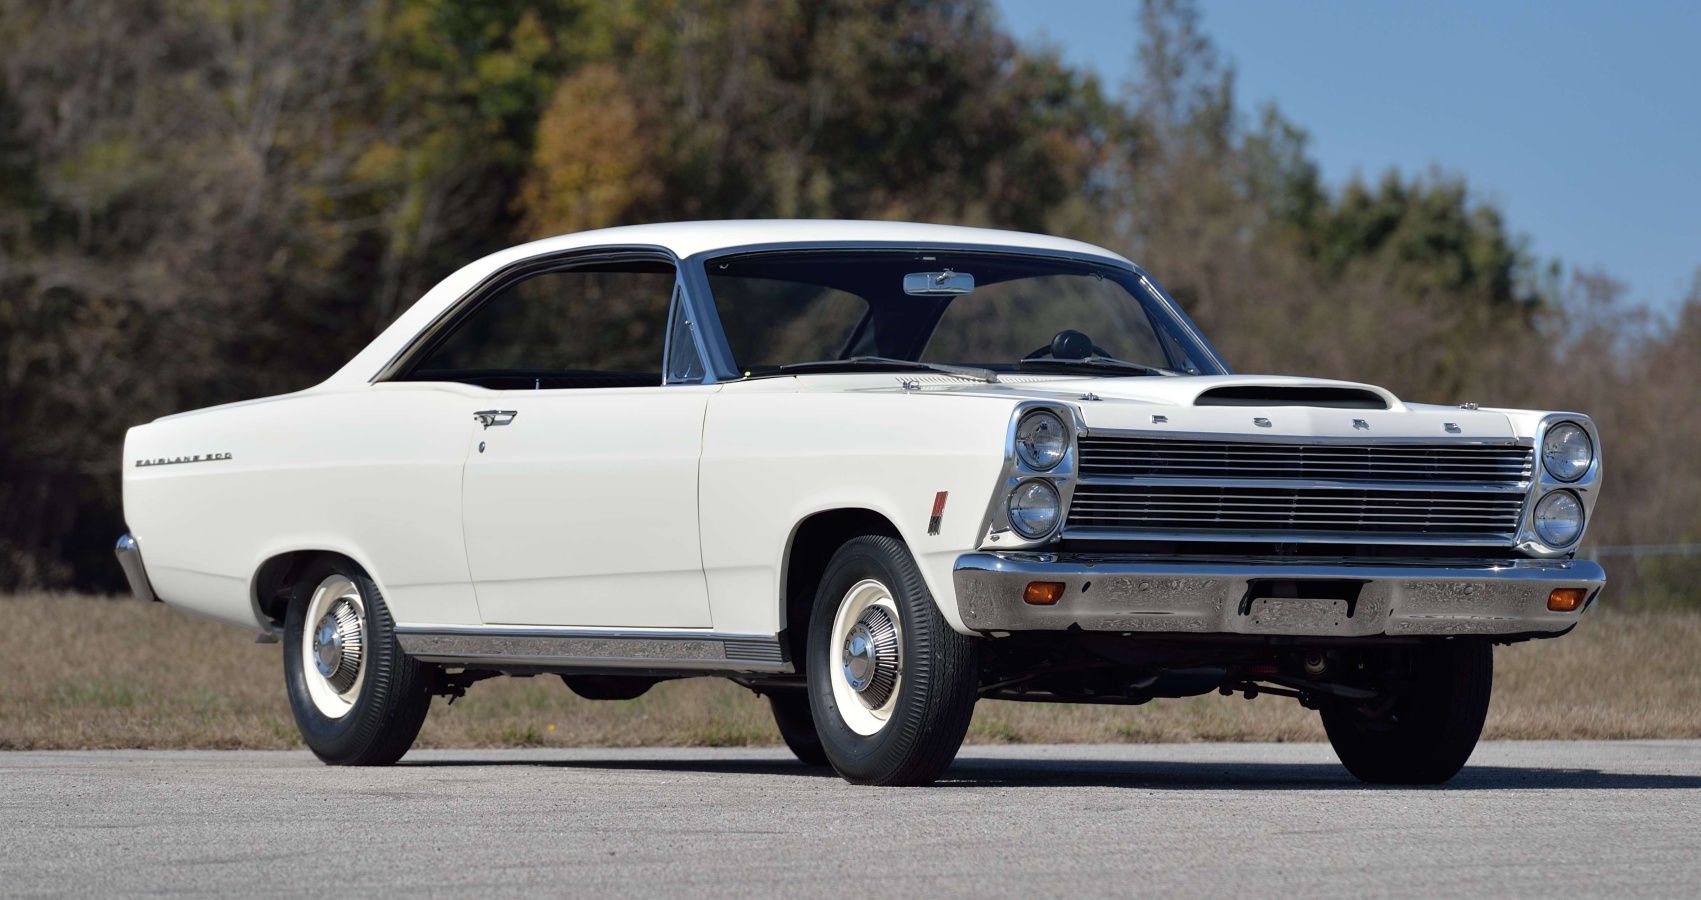 10 Problems With Owning A Muscle Car Every Gearhead Should Know